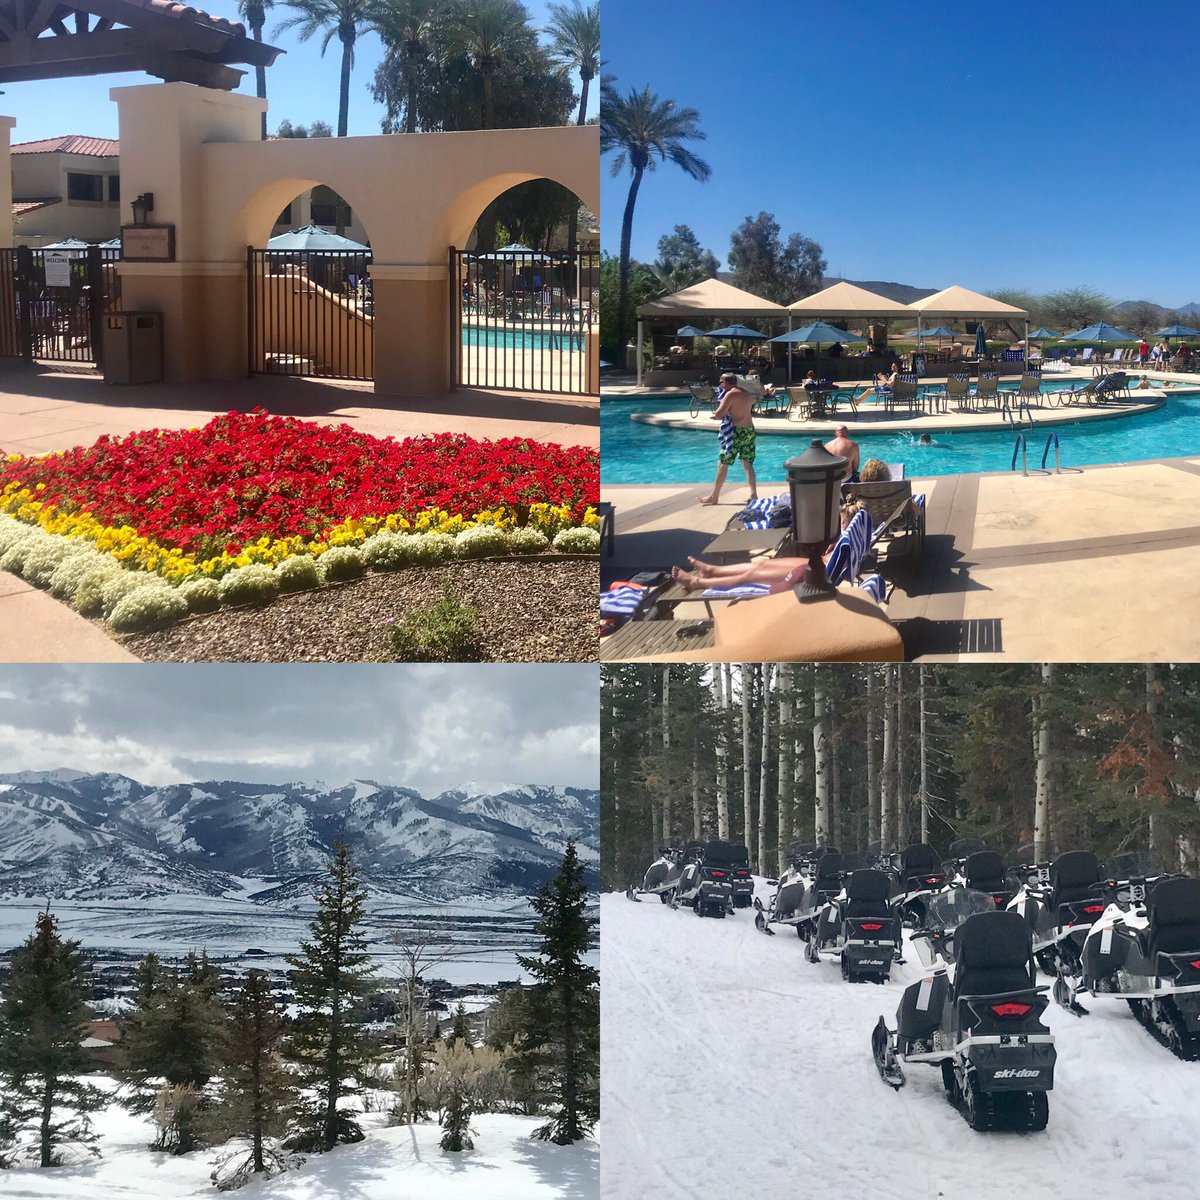 One of the reasons I love the Rockies experience! You can go from Snow and Snowmobiles in the Mountains to Sun and swimming pools in an hour flight in so many directions! What a great place to live! @wyndestinations #ComeToWYND #ComeToTheRockies #LifestyleLiving